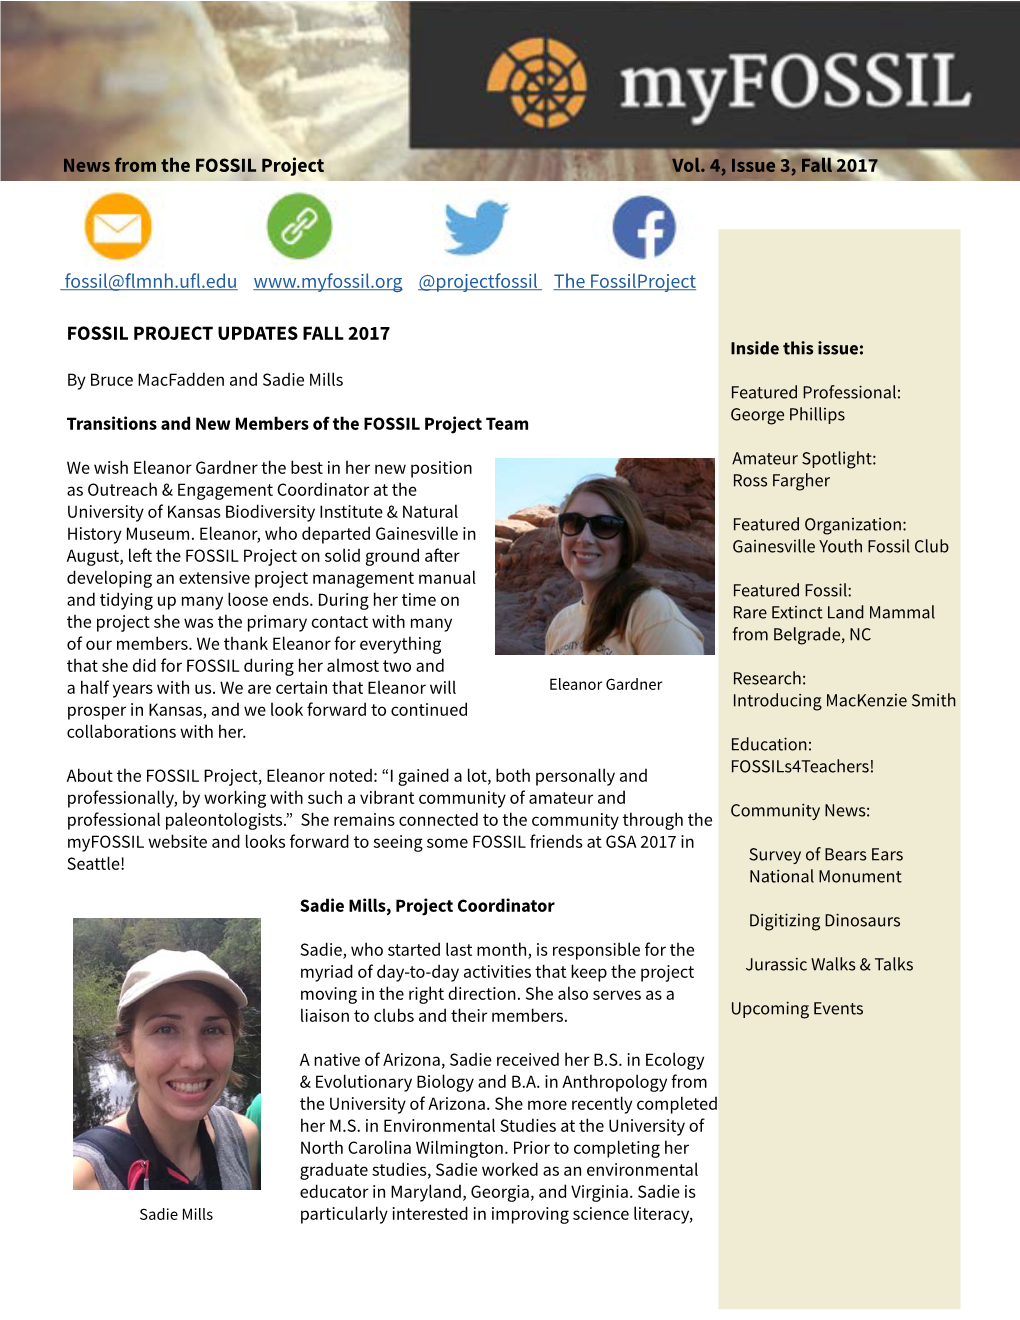 FOSSIL Project Newsletter Fall 2017